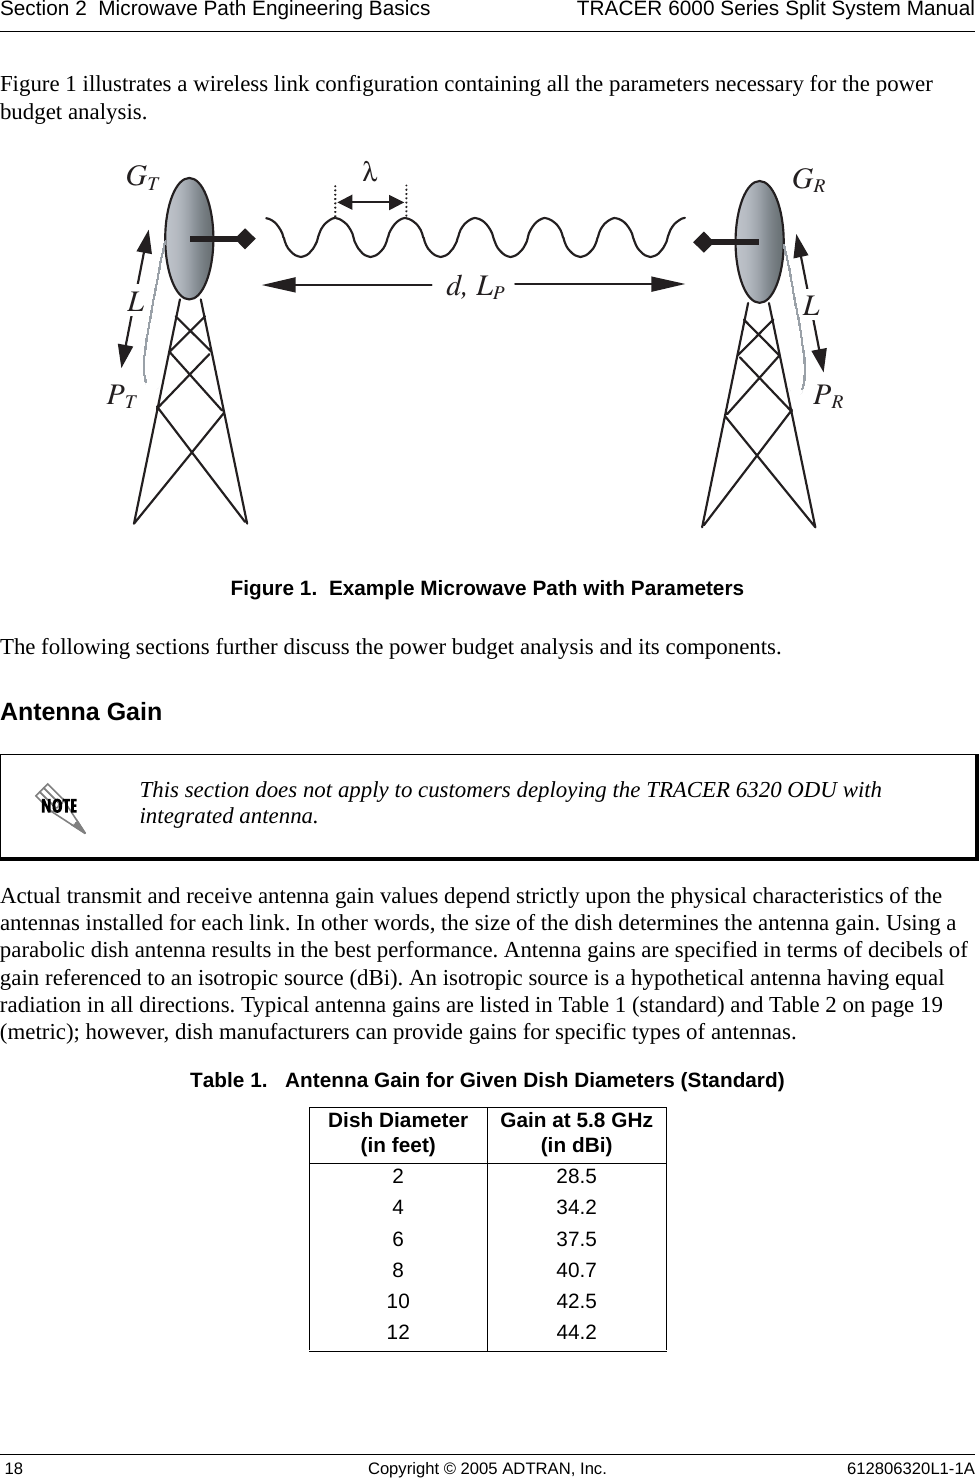 Section 2  Microwave Path Engineering Basics TRACER 6000 Series Split System Manual 18 Copyright © 2005 ADTRAN, Inc. 612806320L1-1AFigure 1 illustrates a wireless link configuration containing all the parameters necessary for the power budget analysis.Figure 1.  Example Microwave Path with ParametersThe following sections further discuss the power budget analysis and its components.Antenna GainActual transmit and receive antenna gain values depend strictly upon the physical characteristics of the antennas installed for each link. In other words, the size of the dish determines the antenna gain. Using a parabolic dish antenna results in the best performance. Antenna gains are specified in terms of decibels of gain referenced to an isotropic source (dBi). An isotropic source is a hypothetical antenna having equal radiation in all directions. Typical antenna gains are listed in Table 1 (standard) and Table 2 on page 19 (metric); however, dish manufacturers can provide gains for specific types of antennas.This section does not apply to customers deploying the TRACER 6320 ODU with integrated antenna. Table 1.   Antenna Gain for Given Dish Diameters (Standard)Dish Diameter(in feet) Gain at 5.8 GHz(in dBi)228.5434.2637.5840.710 42.512 44.2 GTGRd, LPPTPRλLL